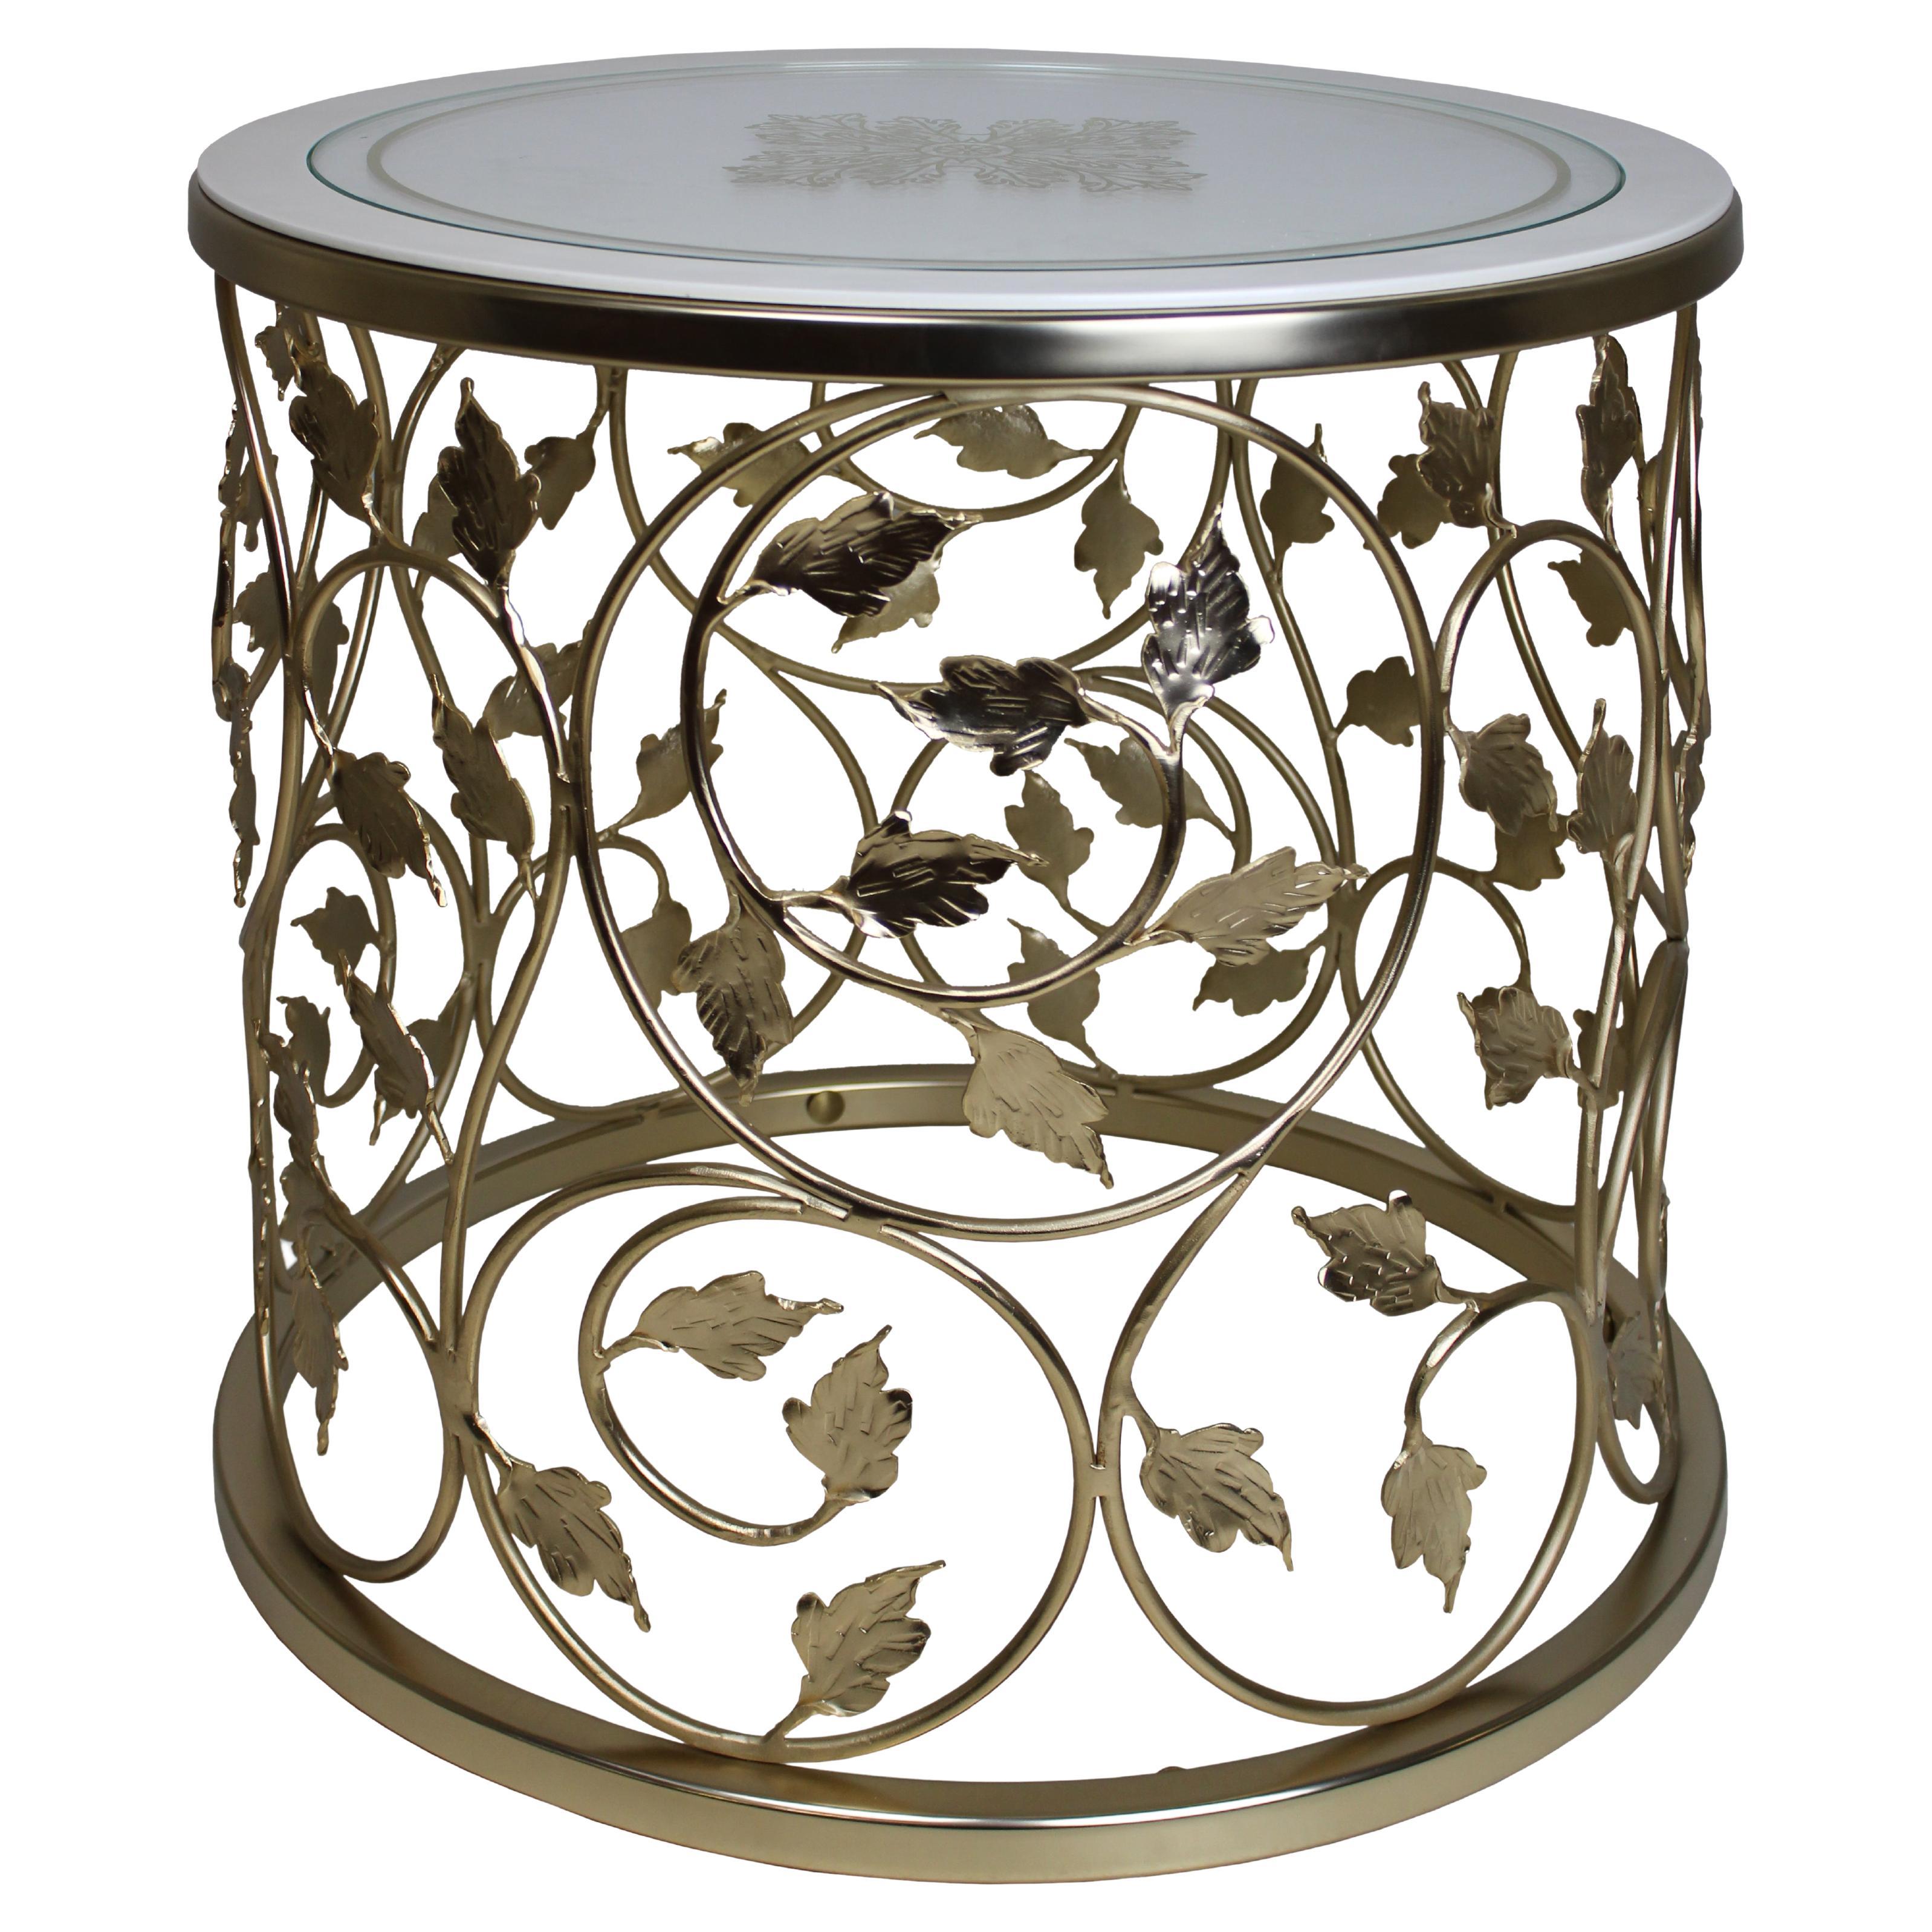 Side table with wrought iron base and wood and glass top AQ034 For Sale